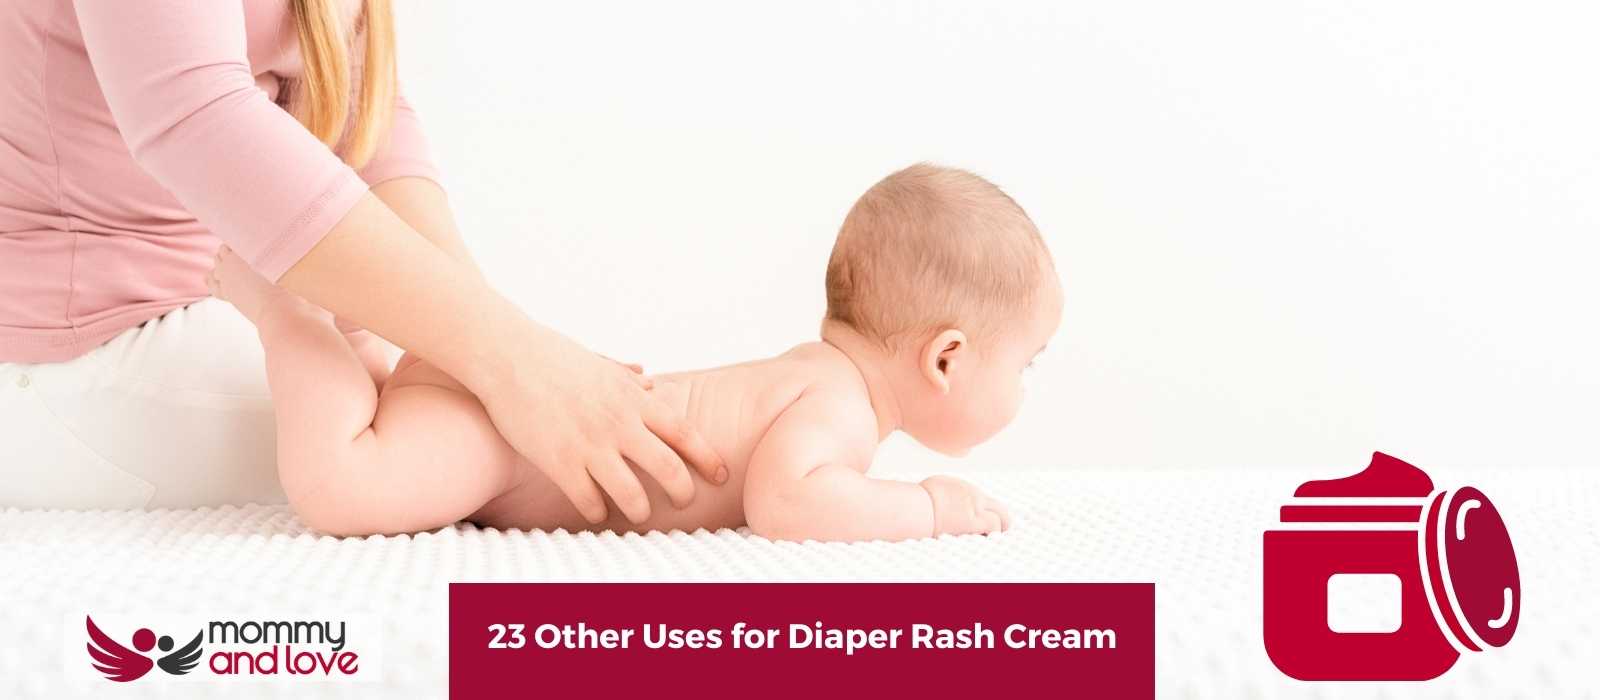 23 Other Uses for Diaper Rash Cream